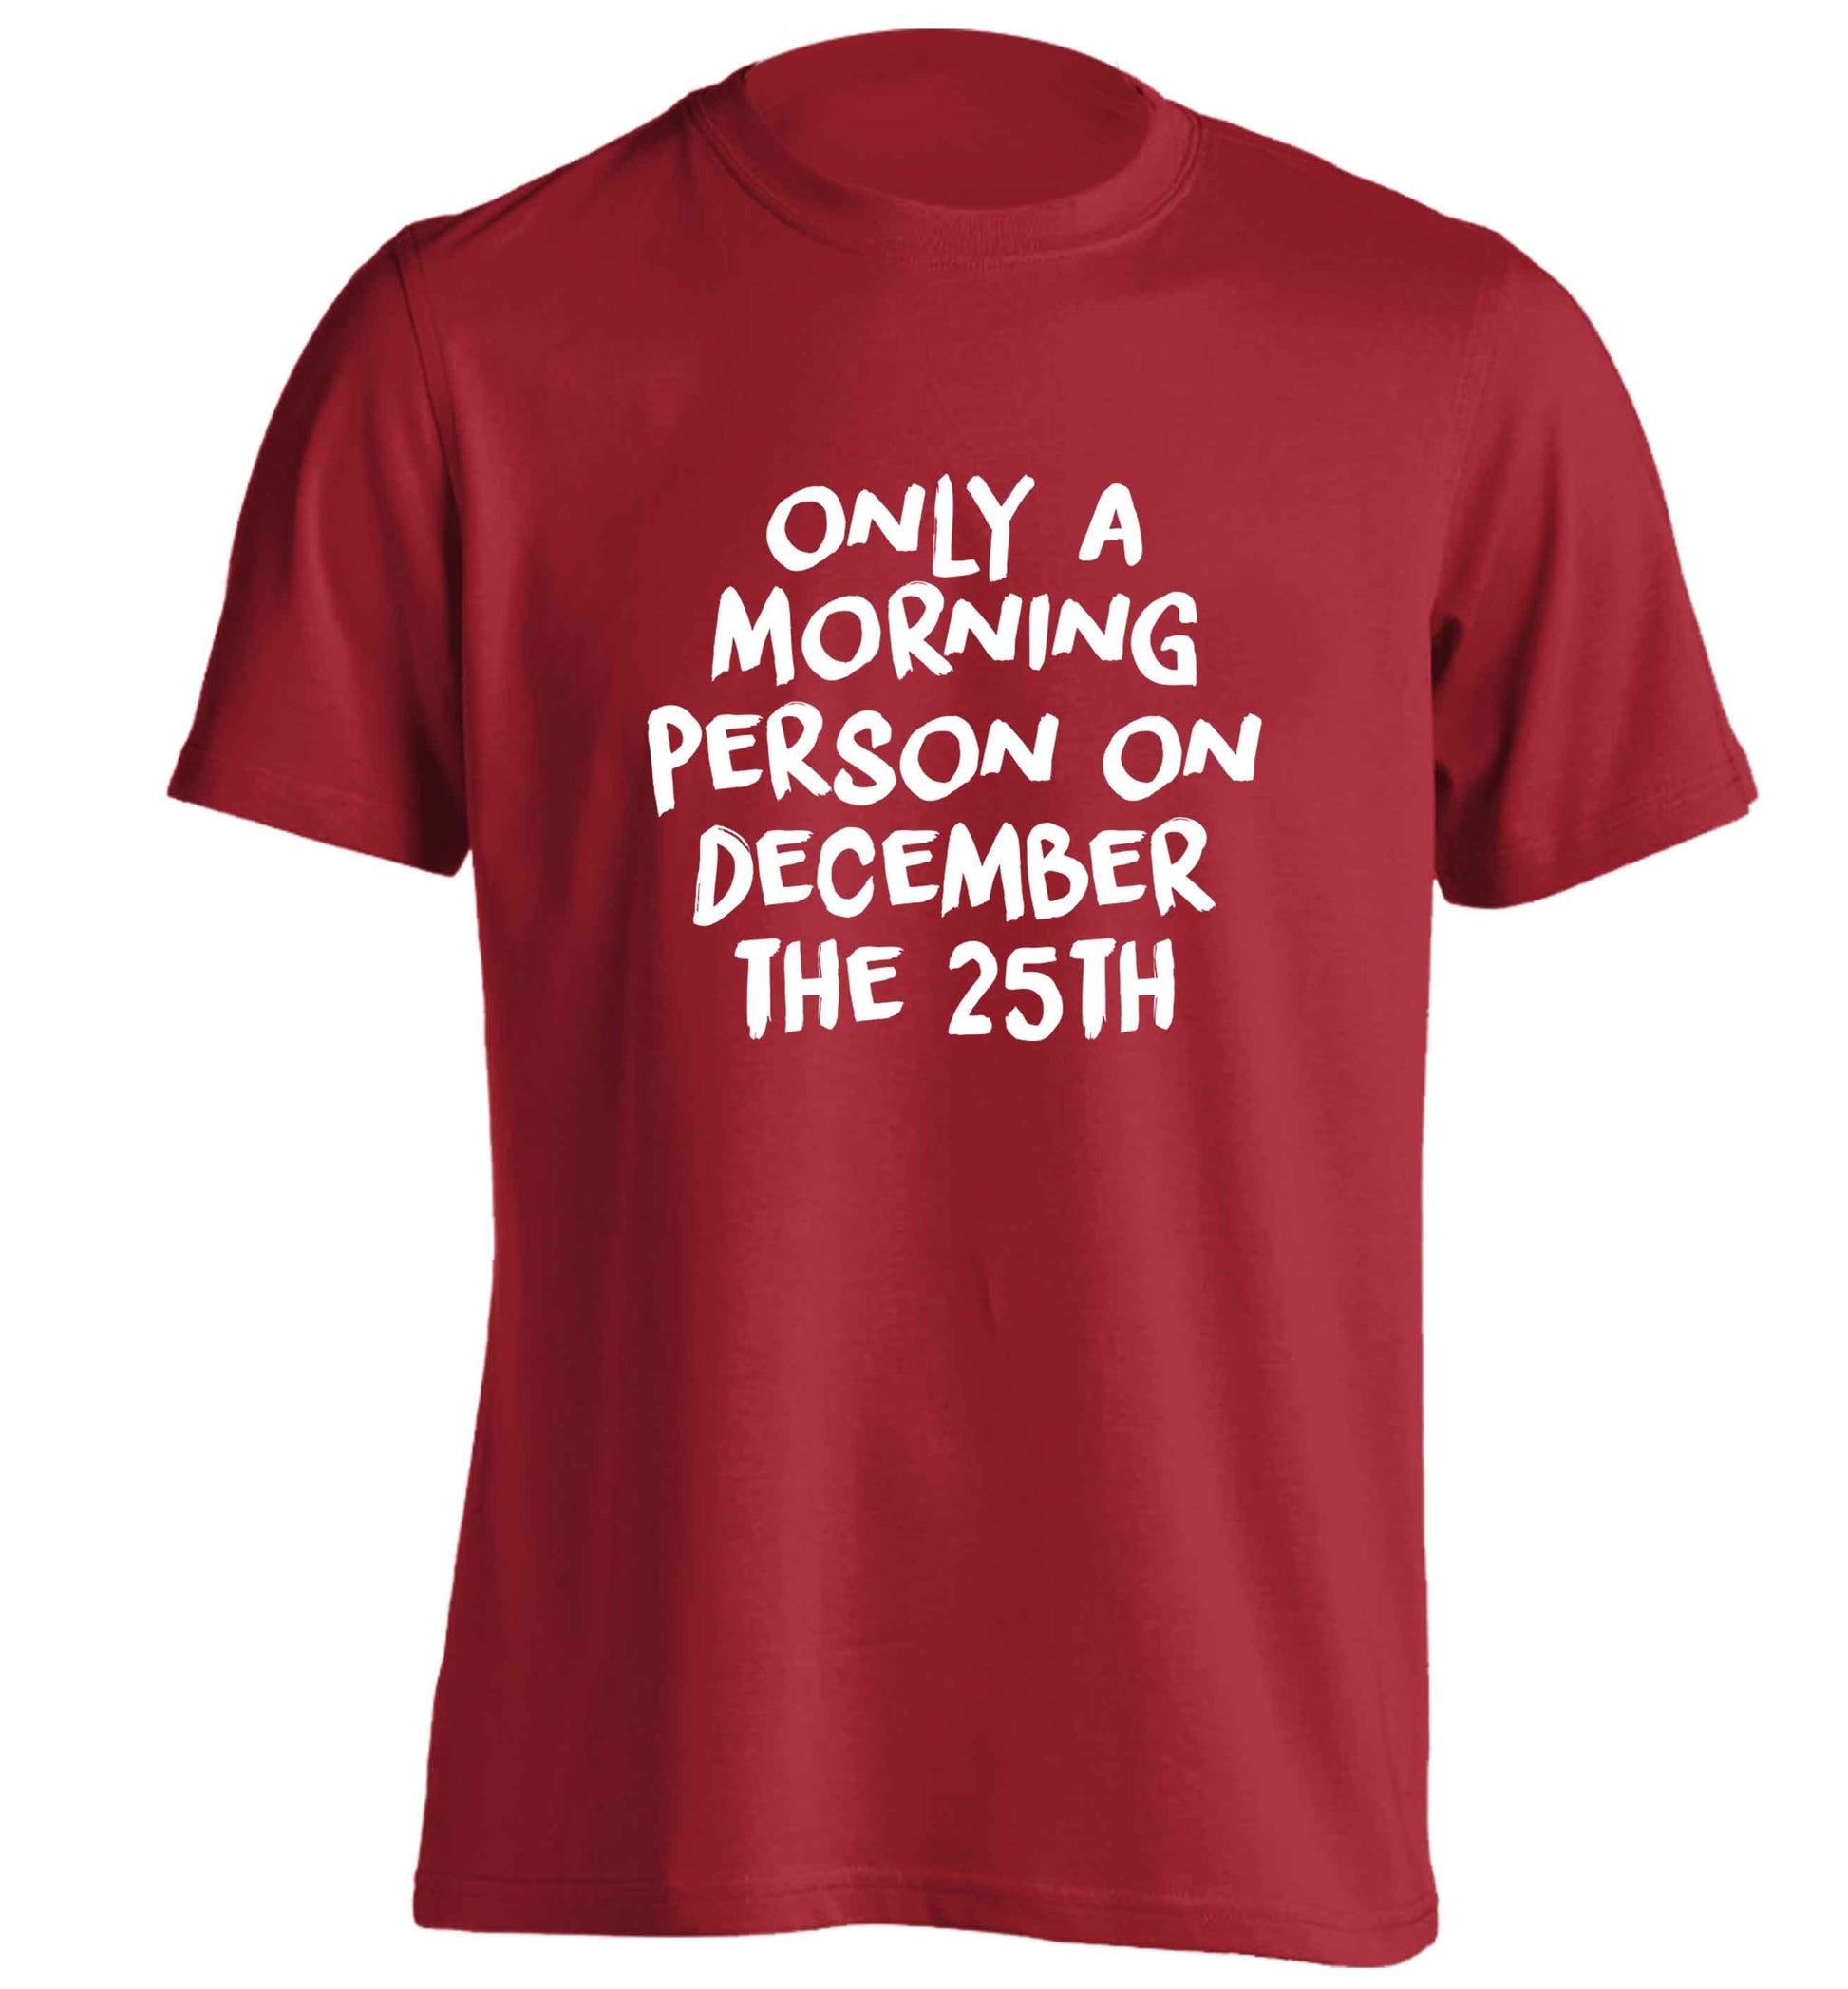 I'm only a morning person on December the 25th adults unisex red Tshirt 2XL